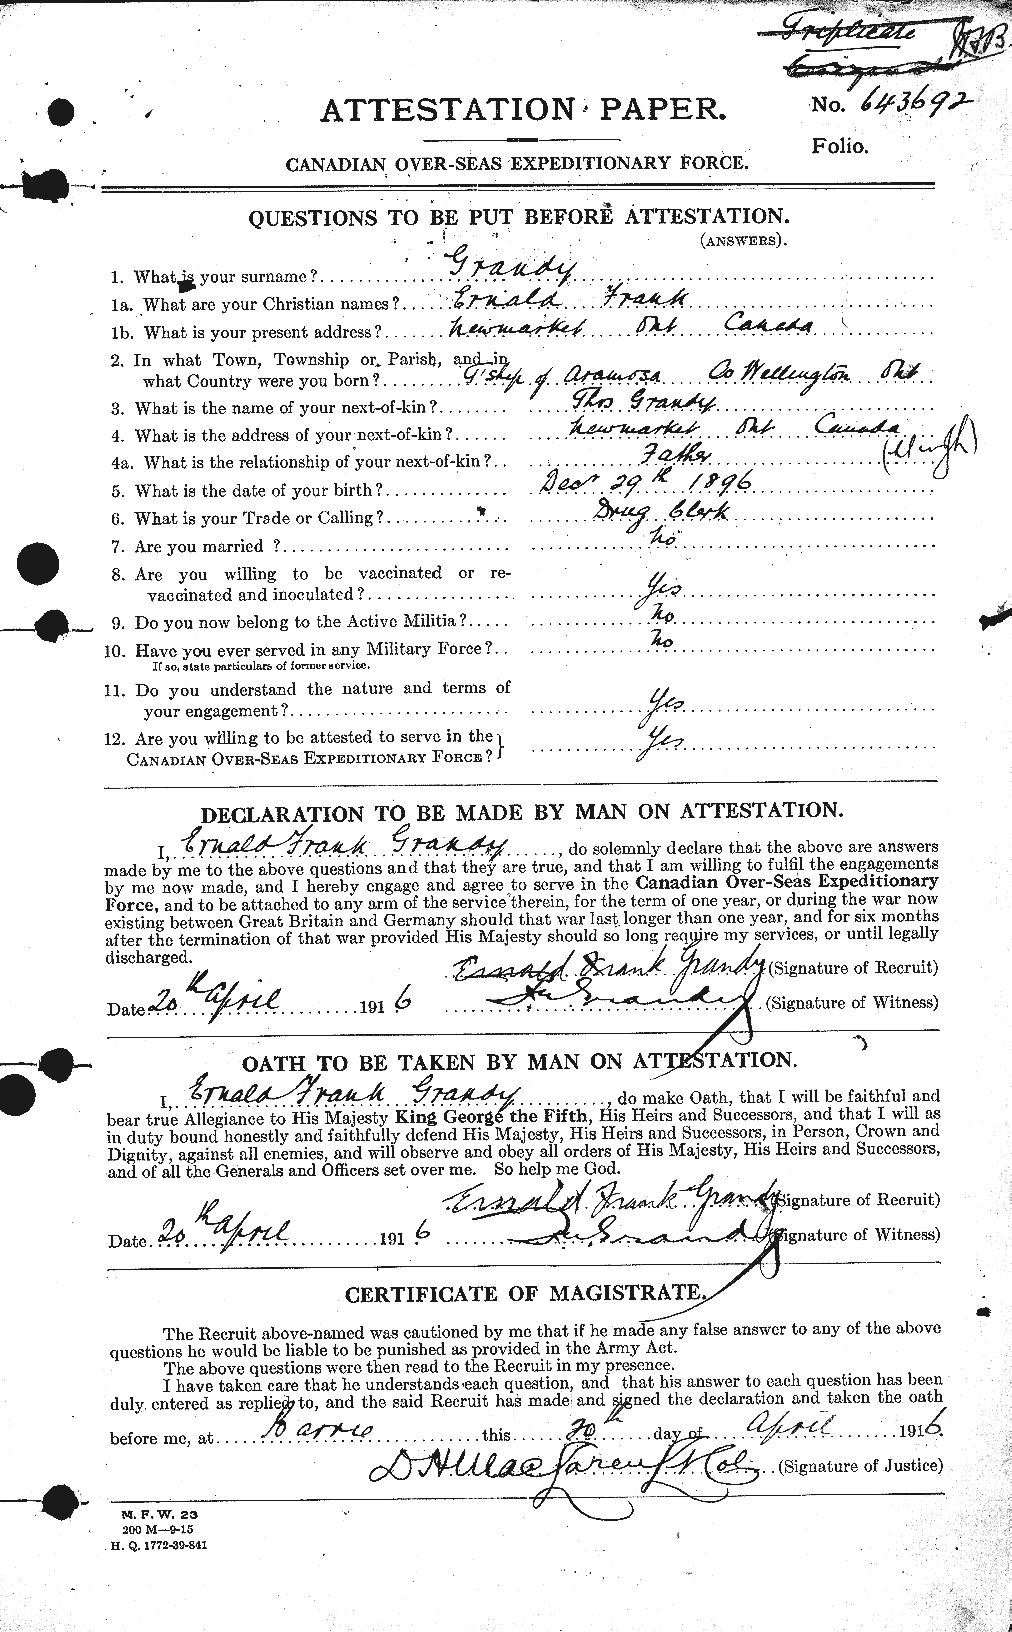 Personnel Records of the First World War - CEF 359056a